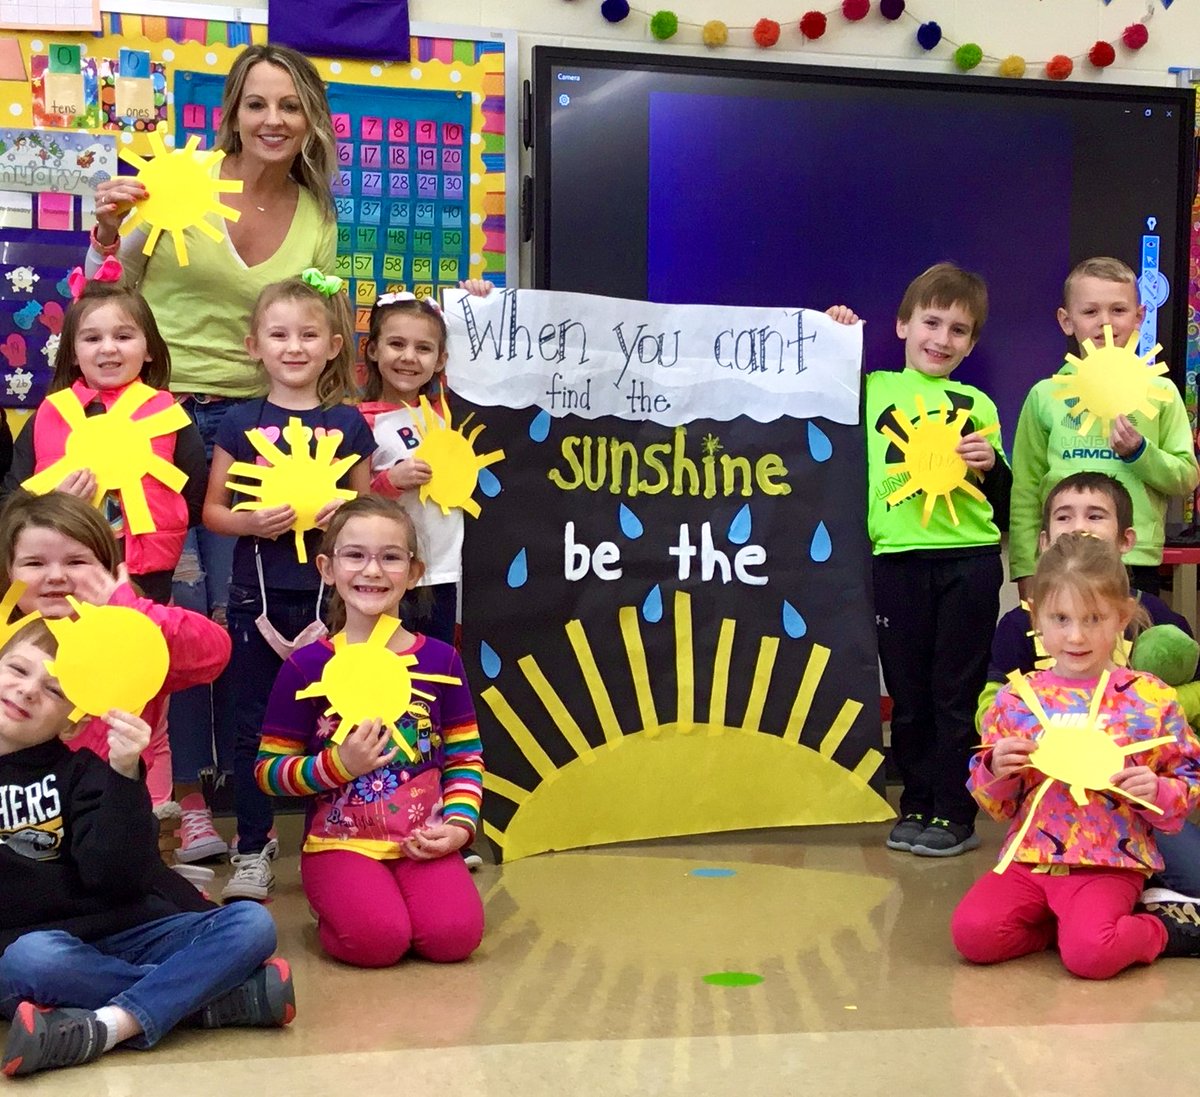 'When you can't find the sunshine, be the sun!' Happy Solar Eclipse! May you always shine bright! 🌞 Thank you Miami Trace Elementary in Washington Court House, OH for this happy photo taken during The Great Kindness Challenge. #KidsforPeace #greakindnesschallenge #solareclipse